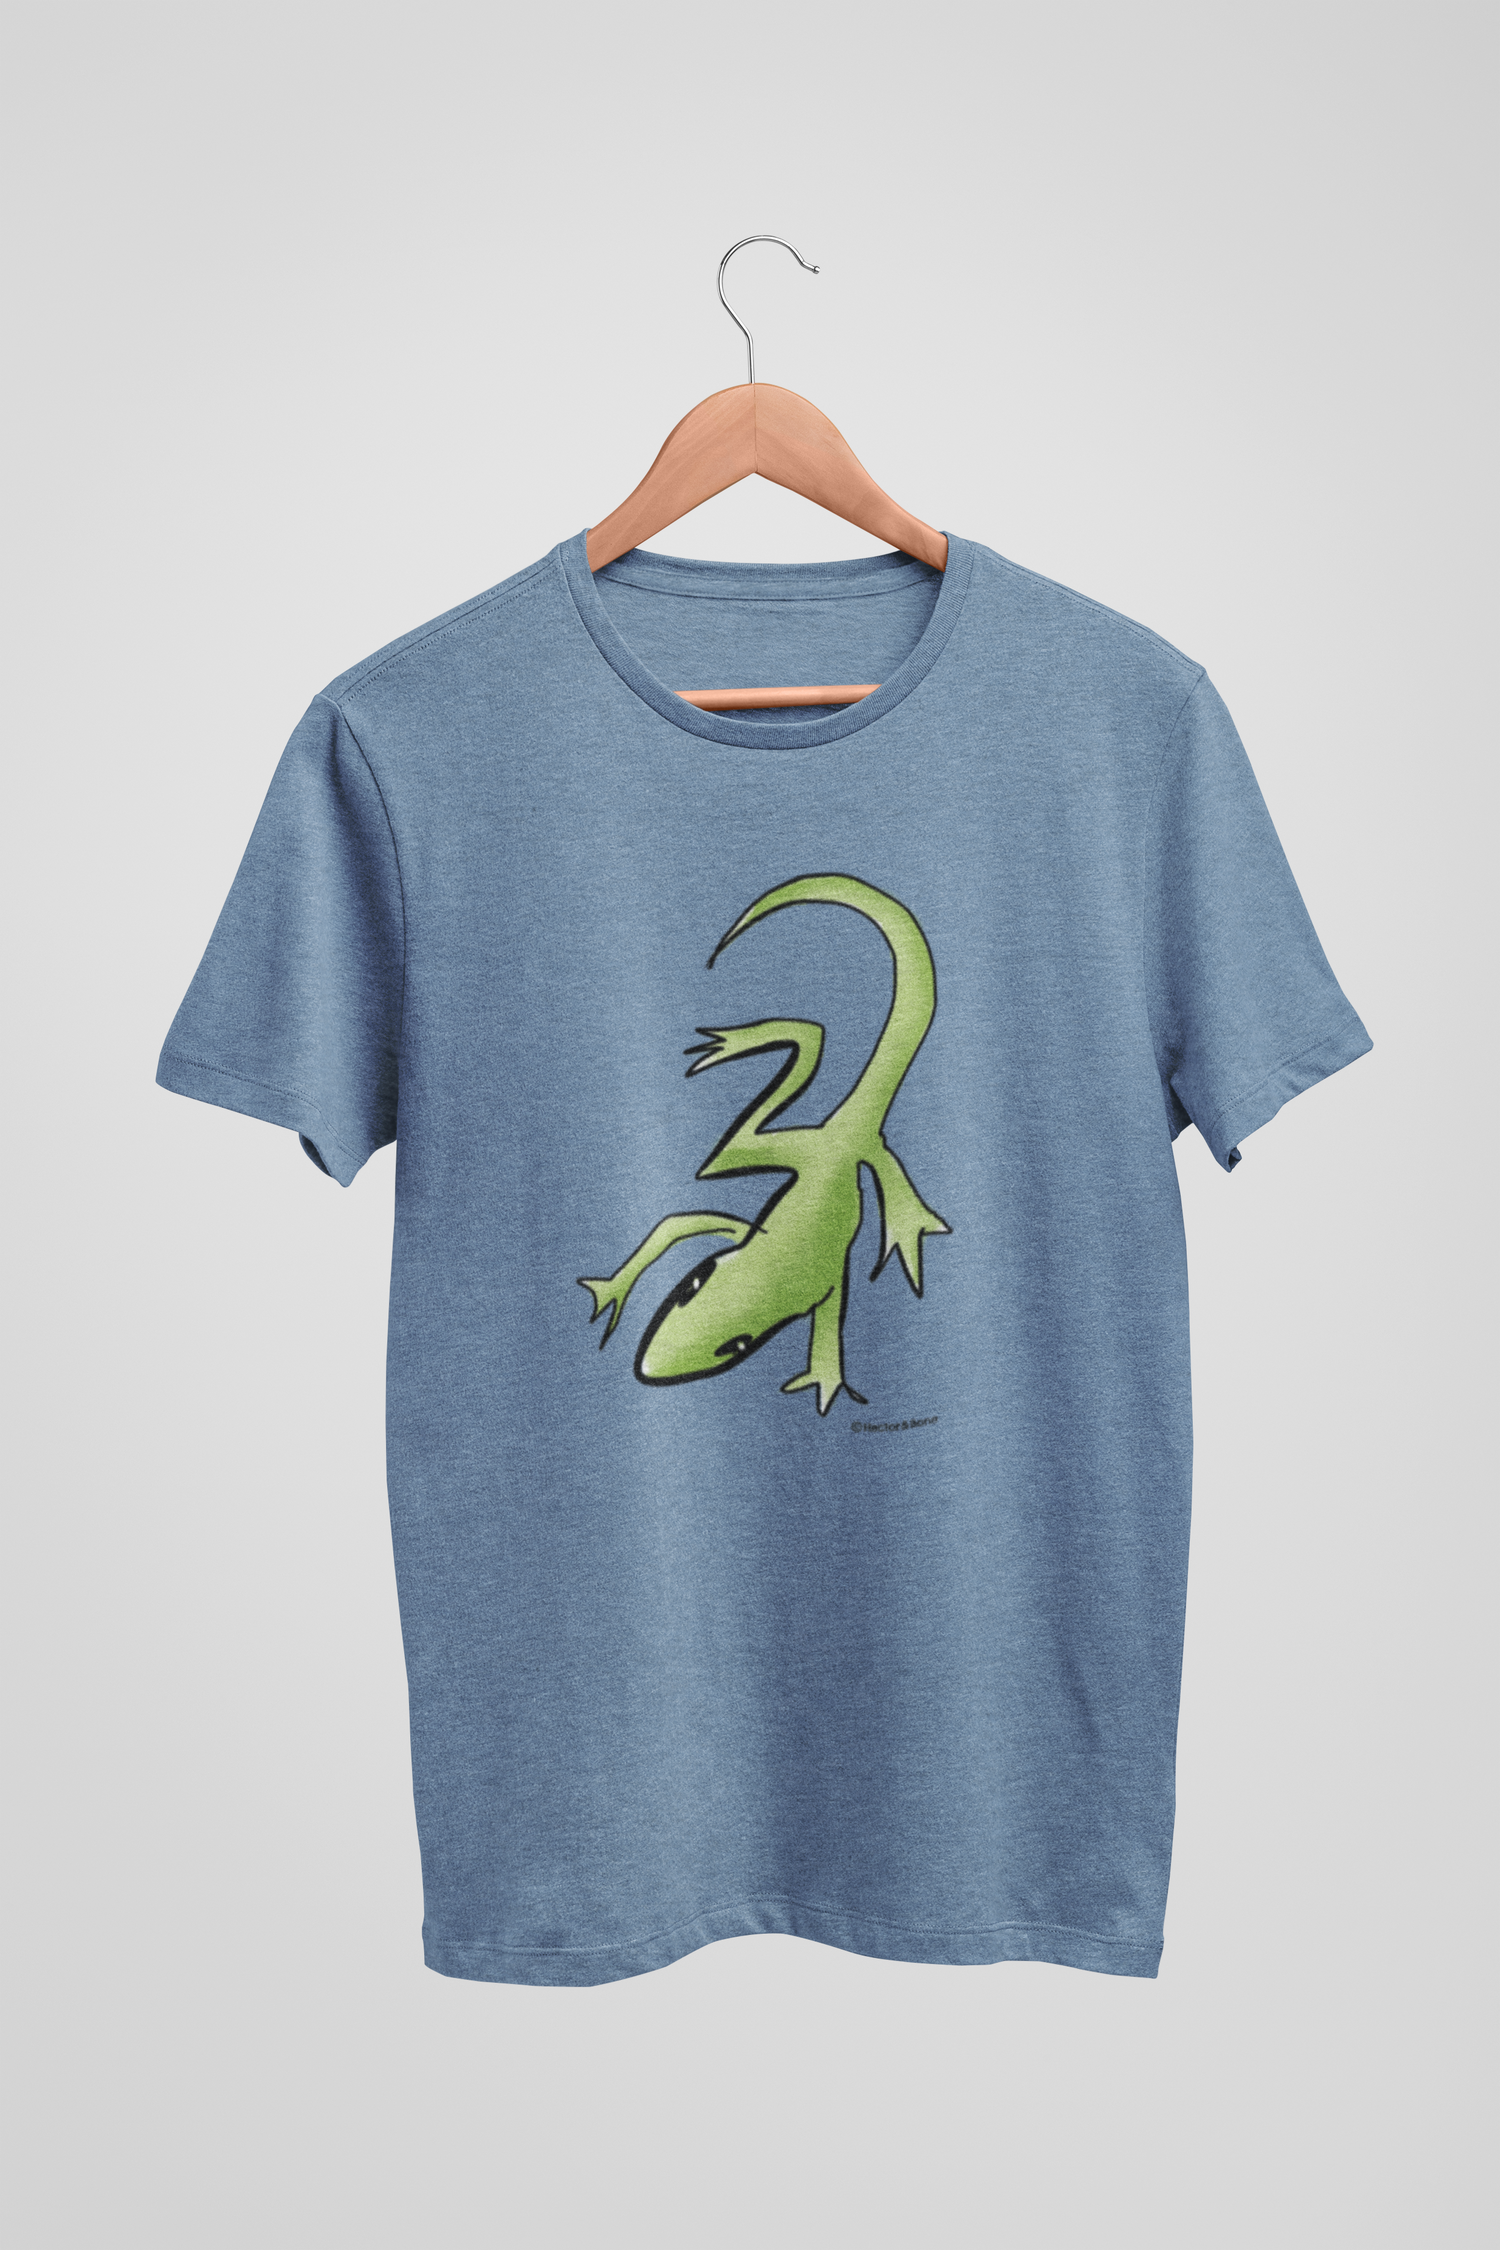 Lizard T-shirt - Illustrated Lounge Lizard T-shirt on vegan mid heather blue colour cotton t-shirts by Hector and Bone